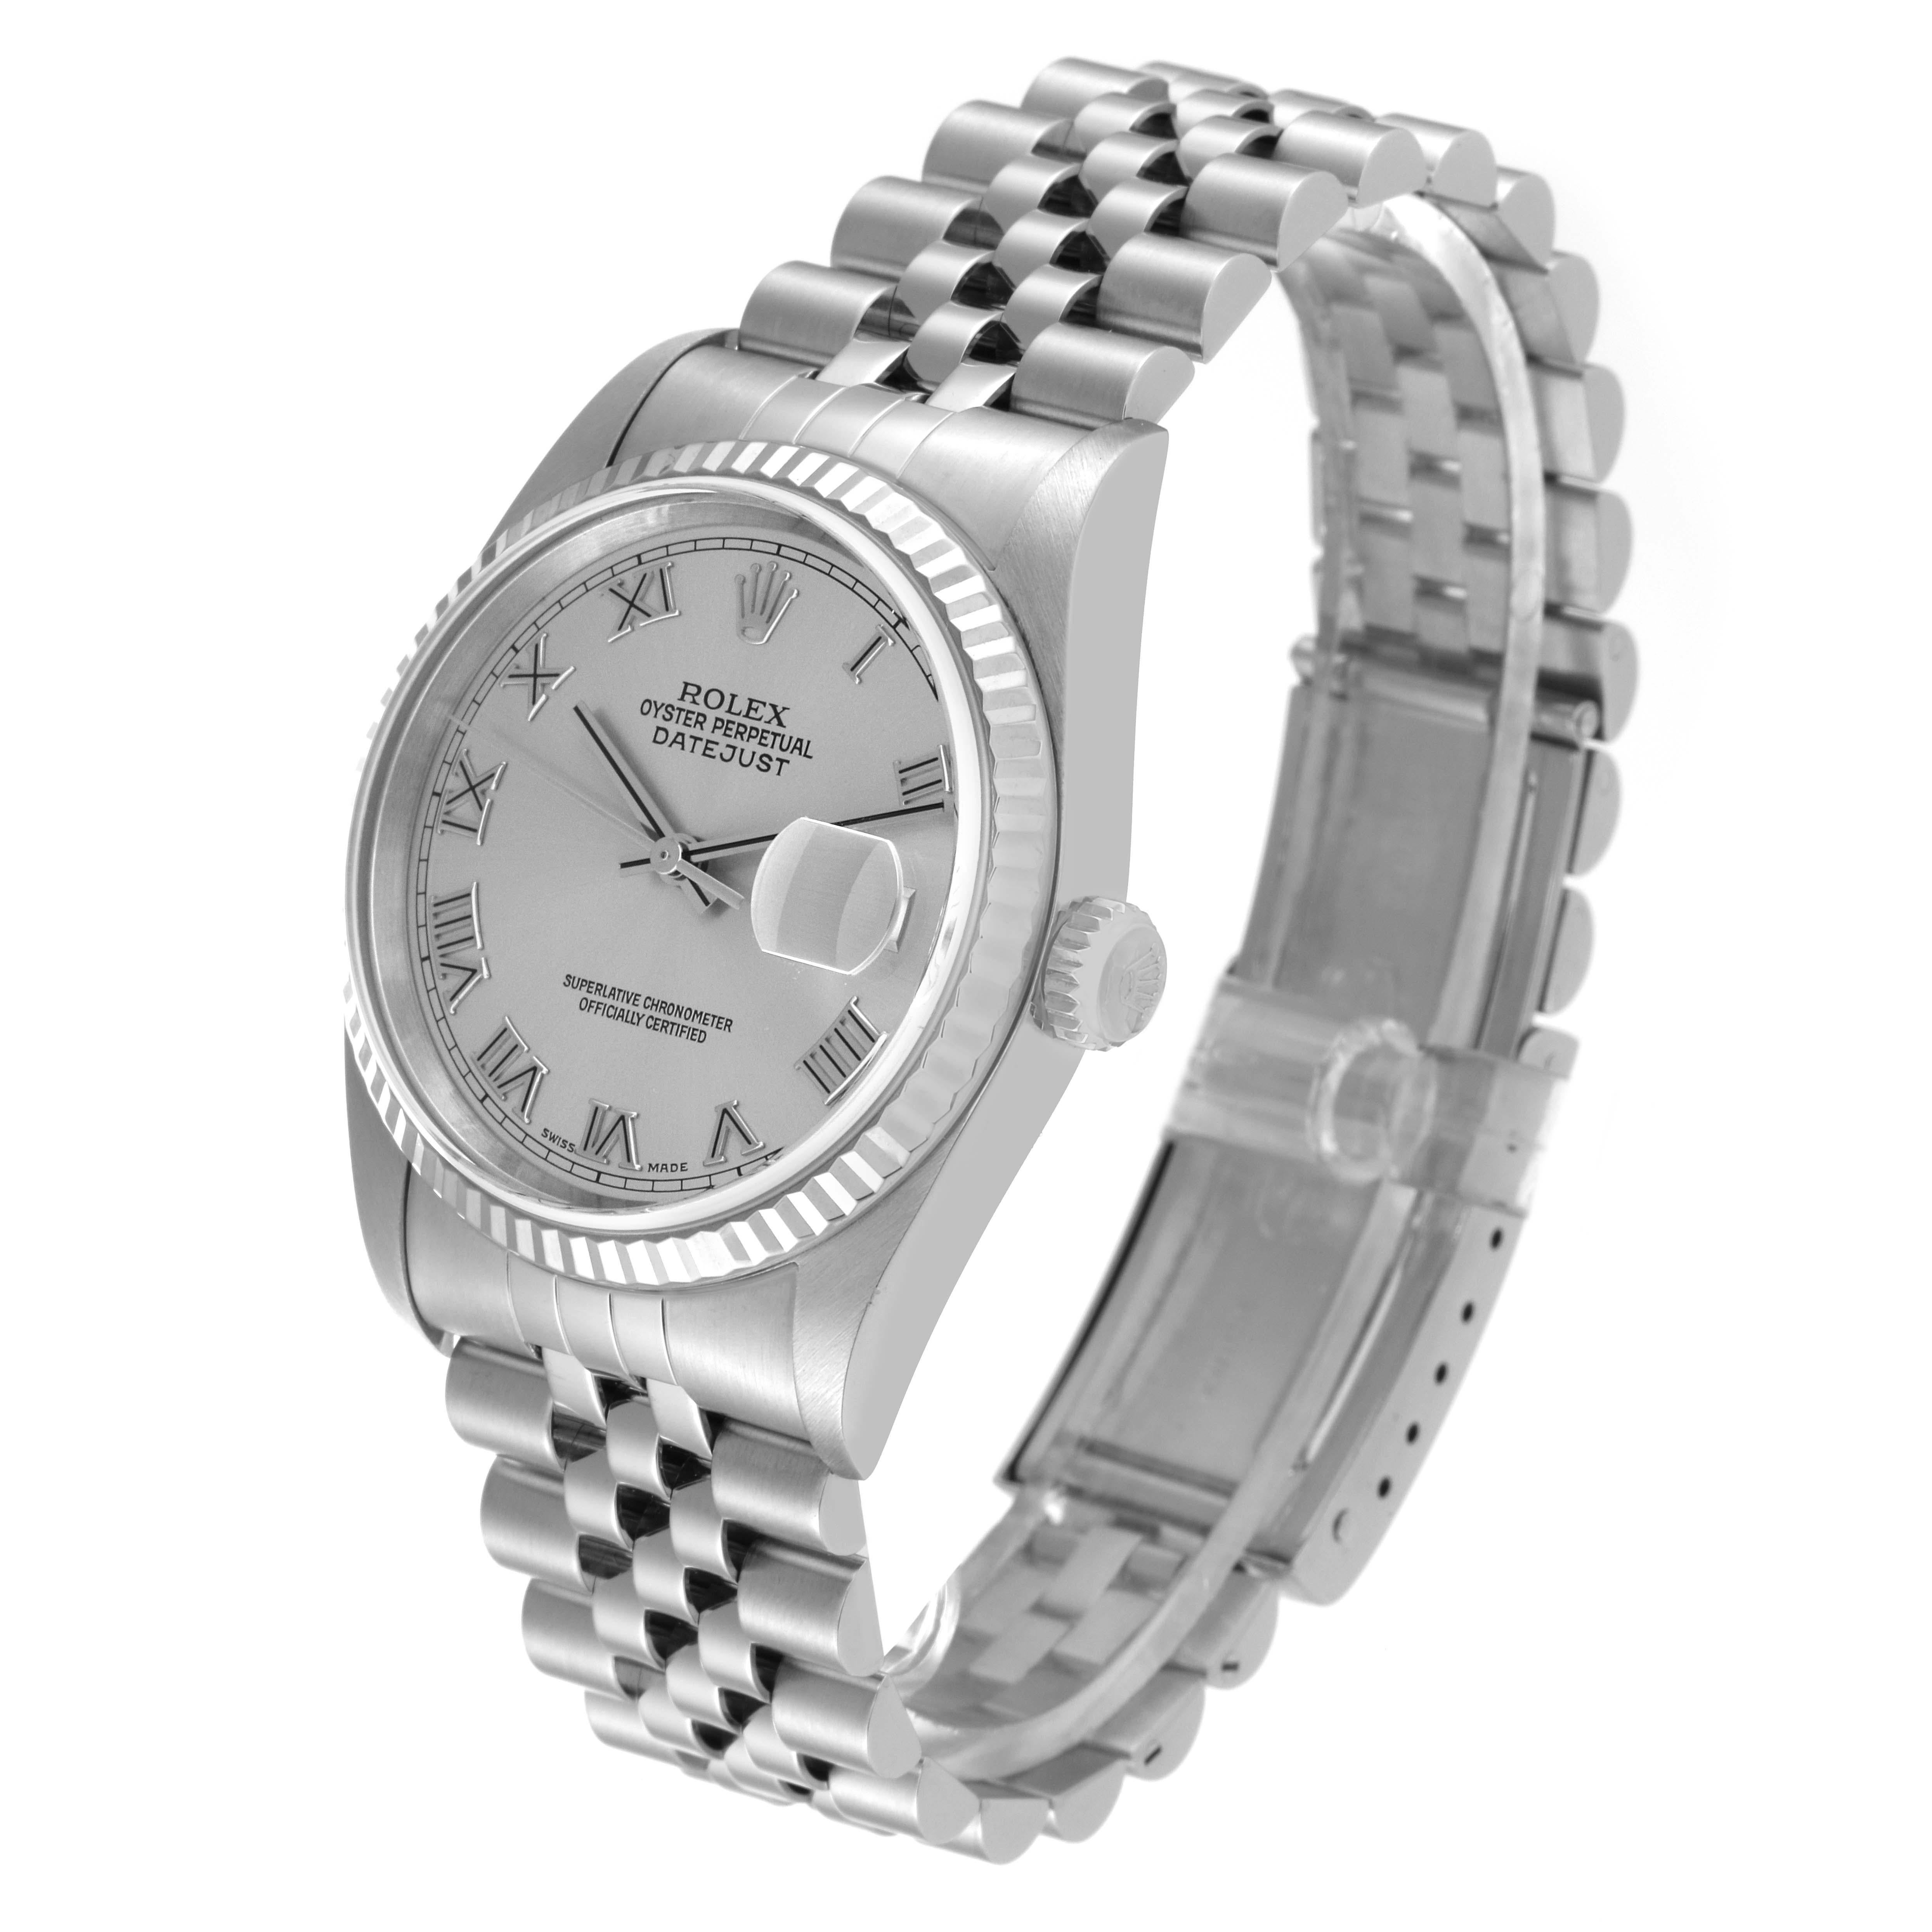 Men's Rolex Datejust 36 Steel White Gold Silver Roman Dial Mens Watch 16234 Box Papers